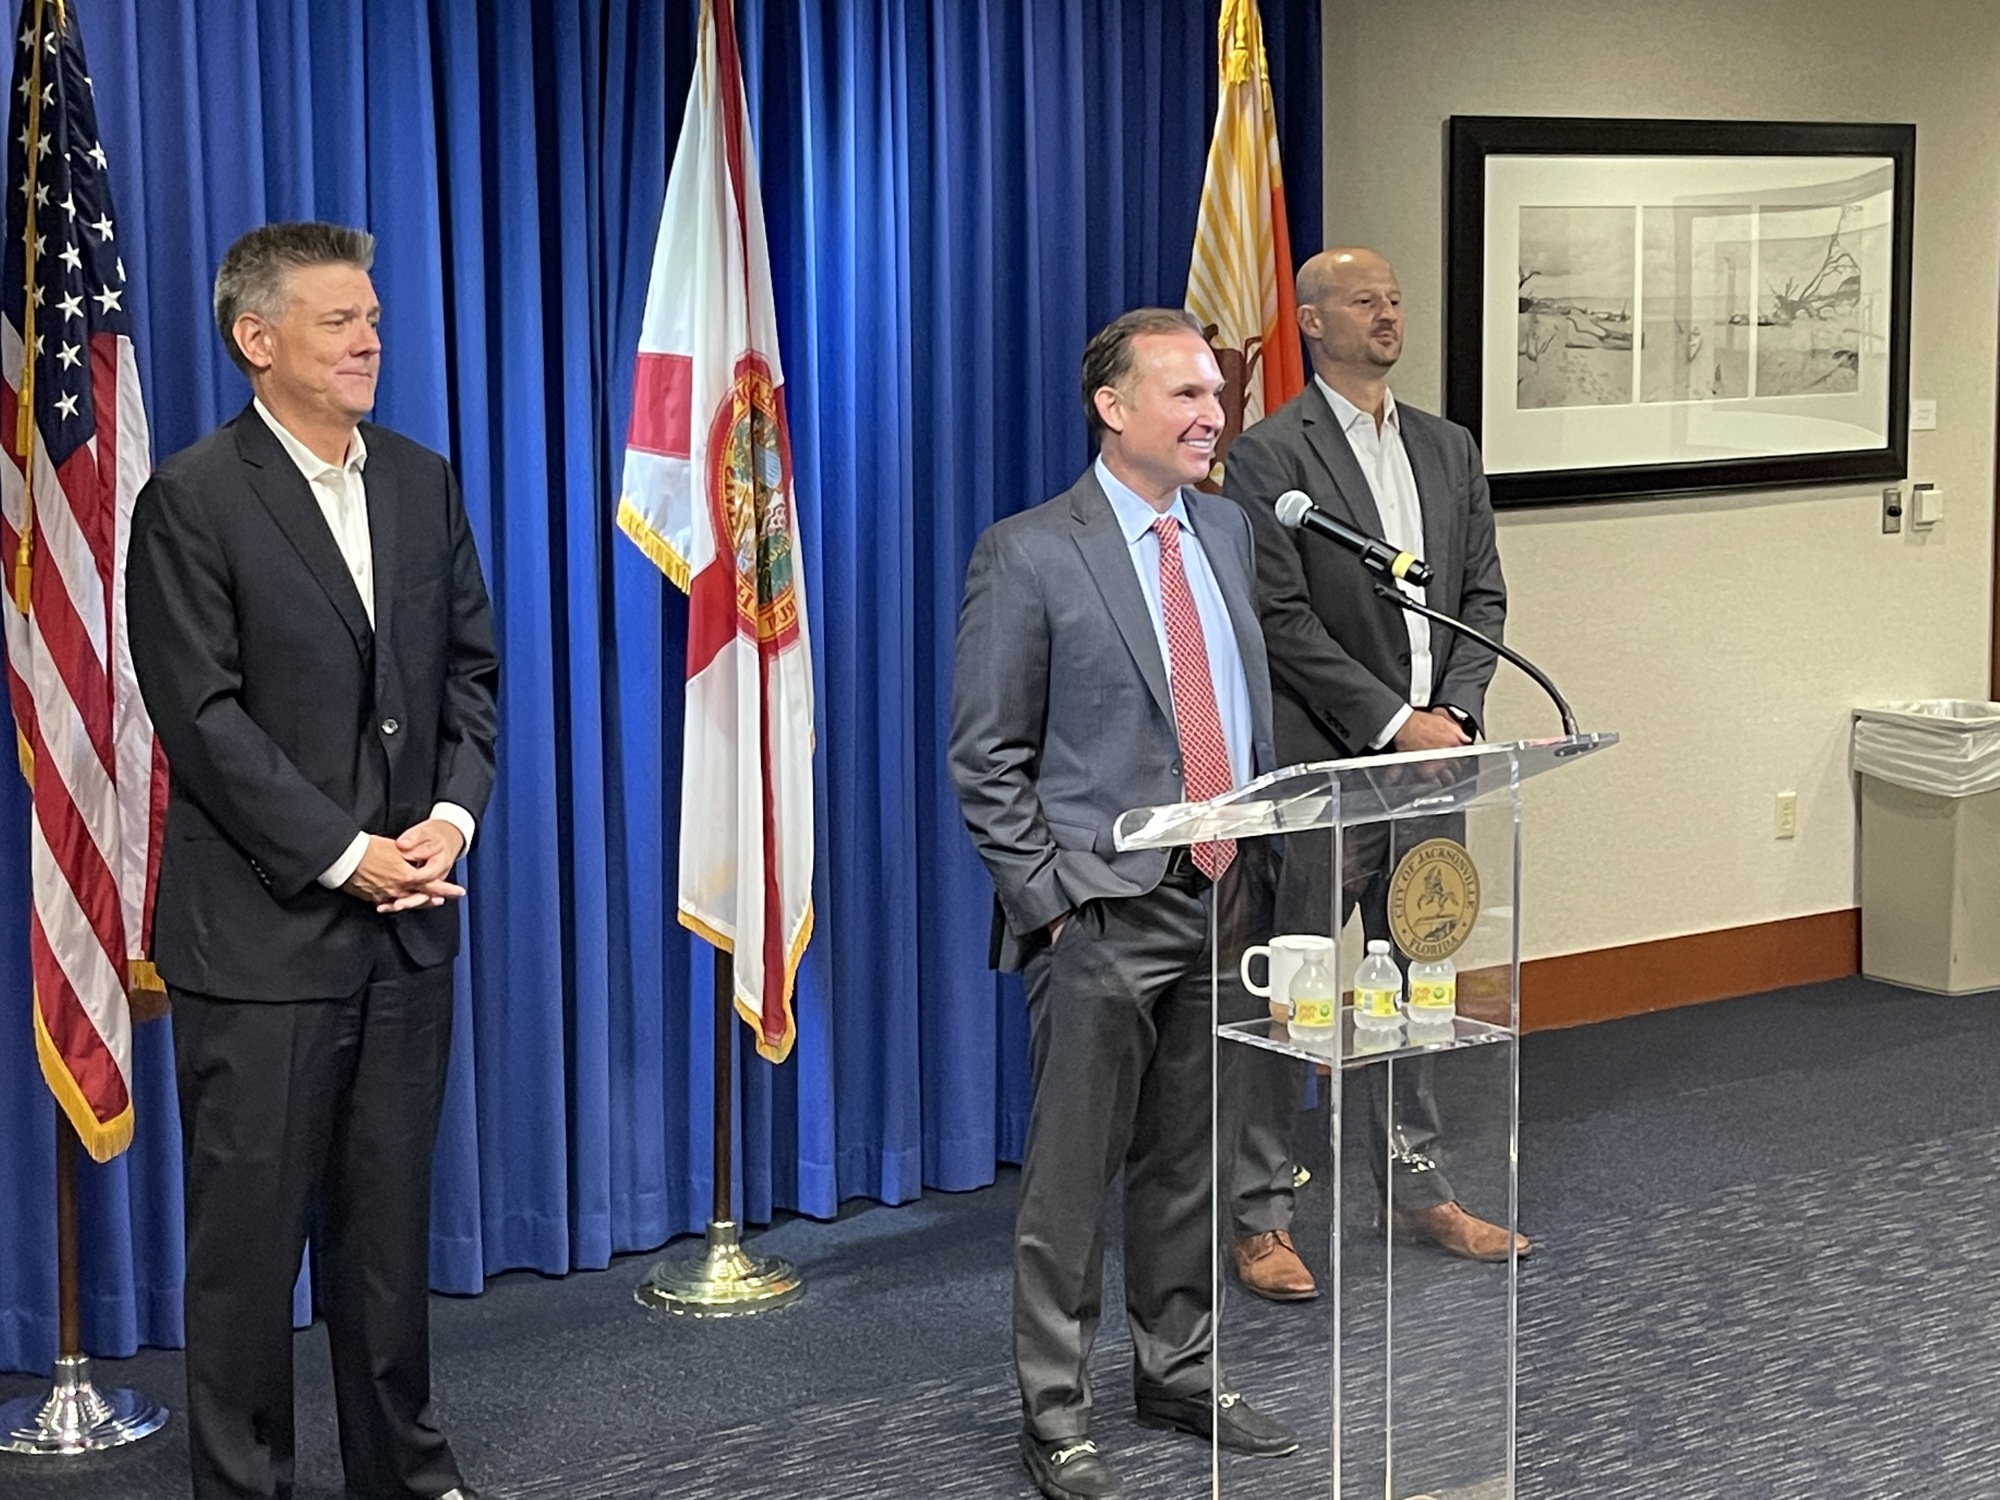 Jacksonville Mayor Lenny Curry speaks to reporters while City Chief Administrative Officer Brian Hughes, left, and city Chief Financial Officer Joey Greive watch.